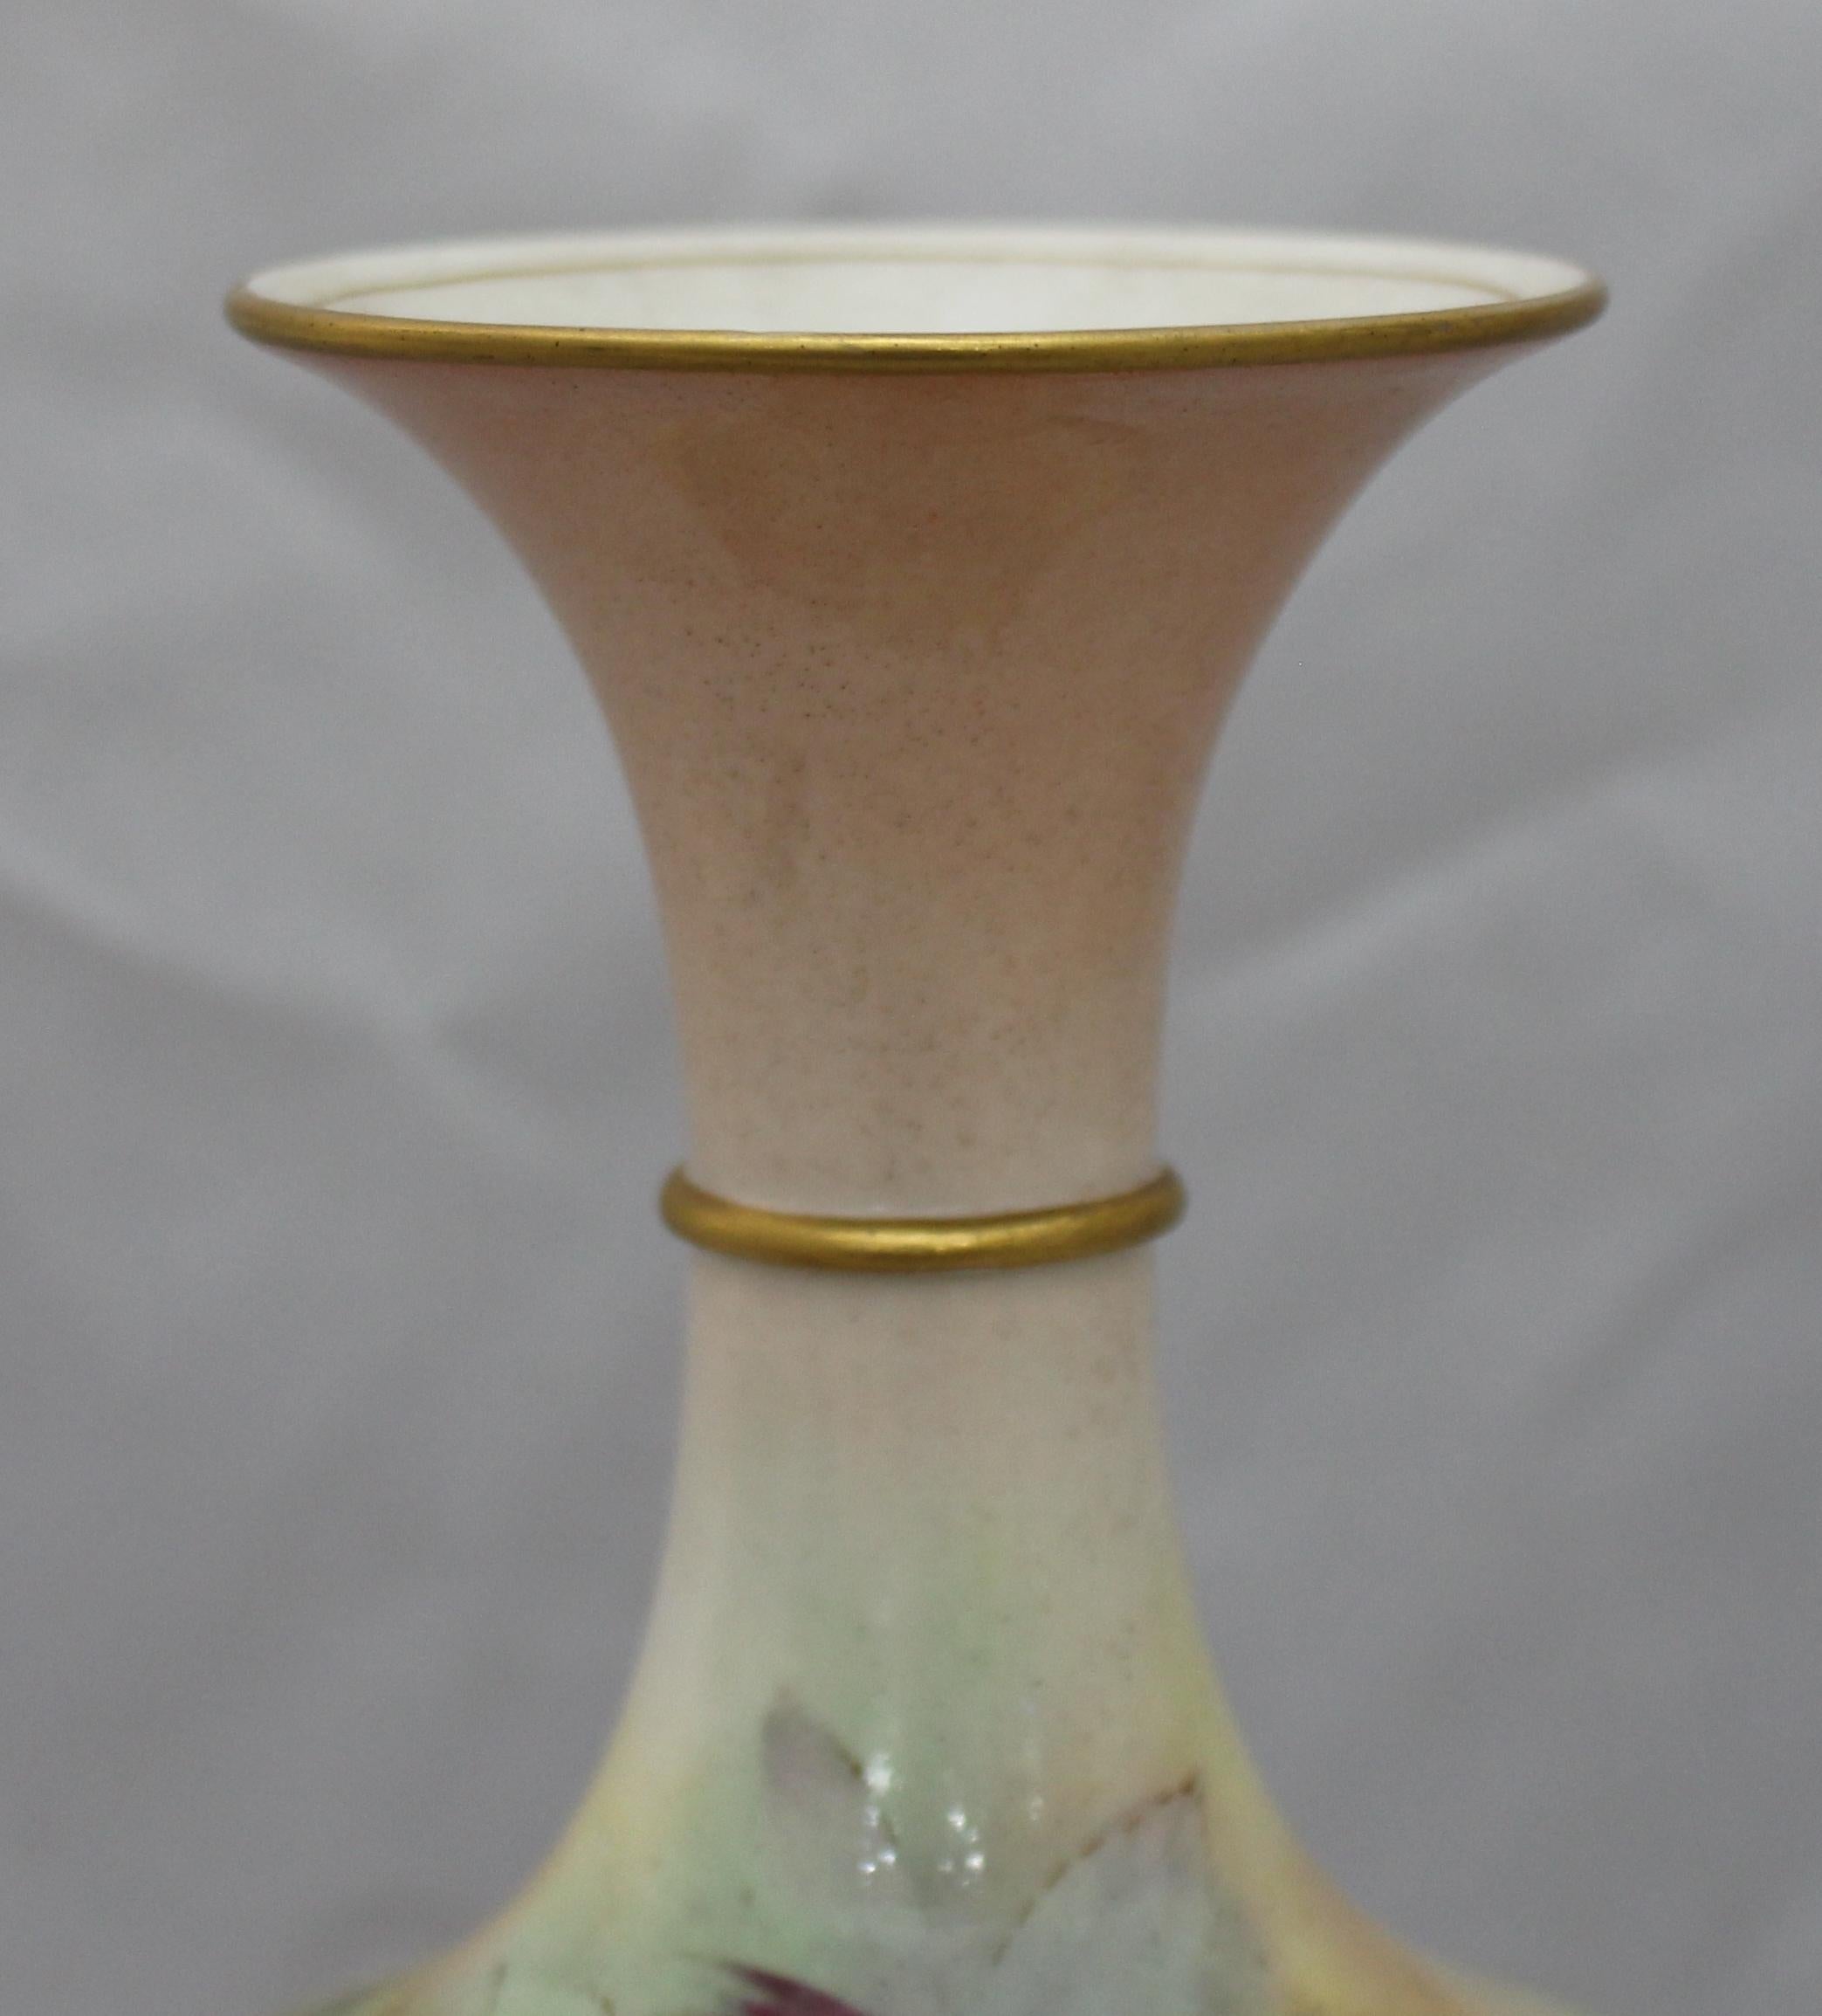 Manufacturer: Royal Worcester
Period: Edwardian, dated 1909
Artist: A.Lewis
Measures: Height 30 cm / 12 in
Condition: Very good condition commensurate with age. No chips, cracks or repairs




Fine large Edwardian Royal Worcester